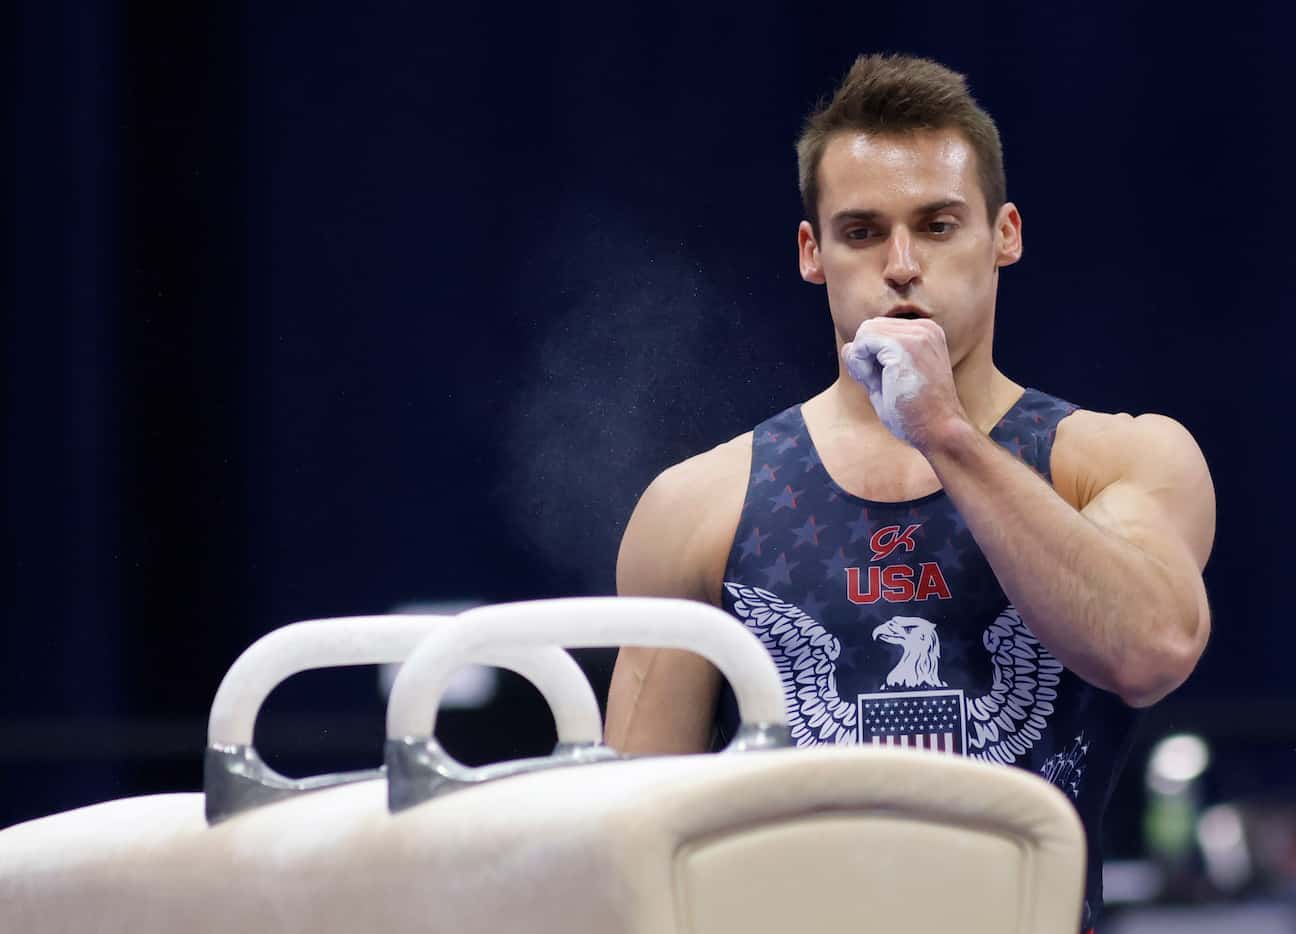 Sam Mikulak blows chalk off his hand before competing on the pommel horse during day 2 of...